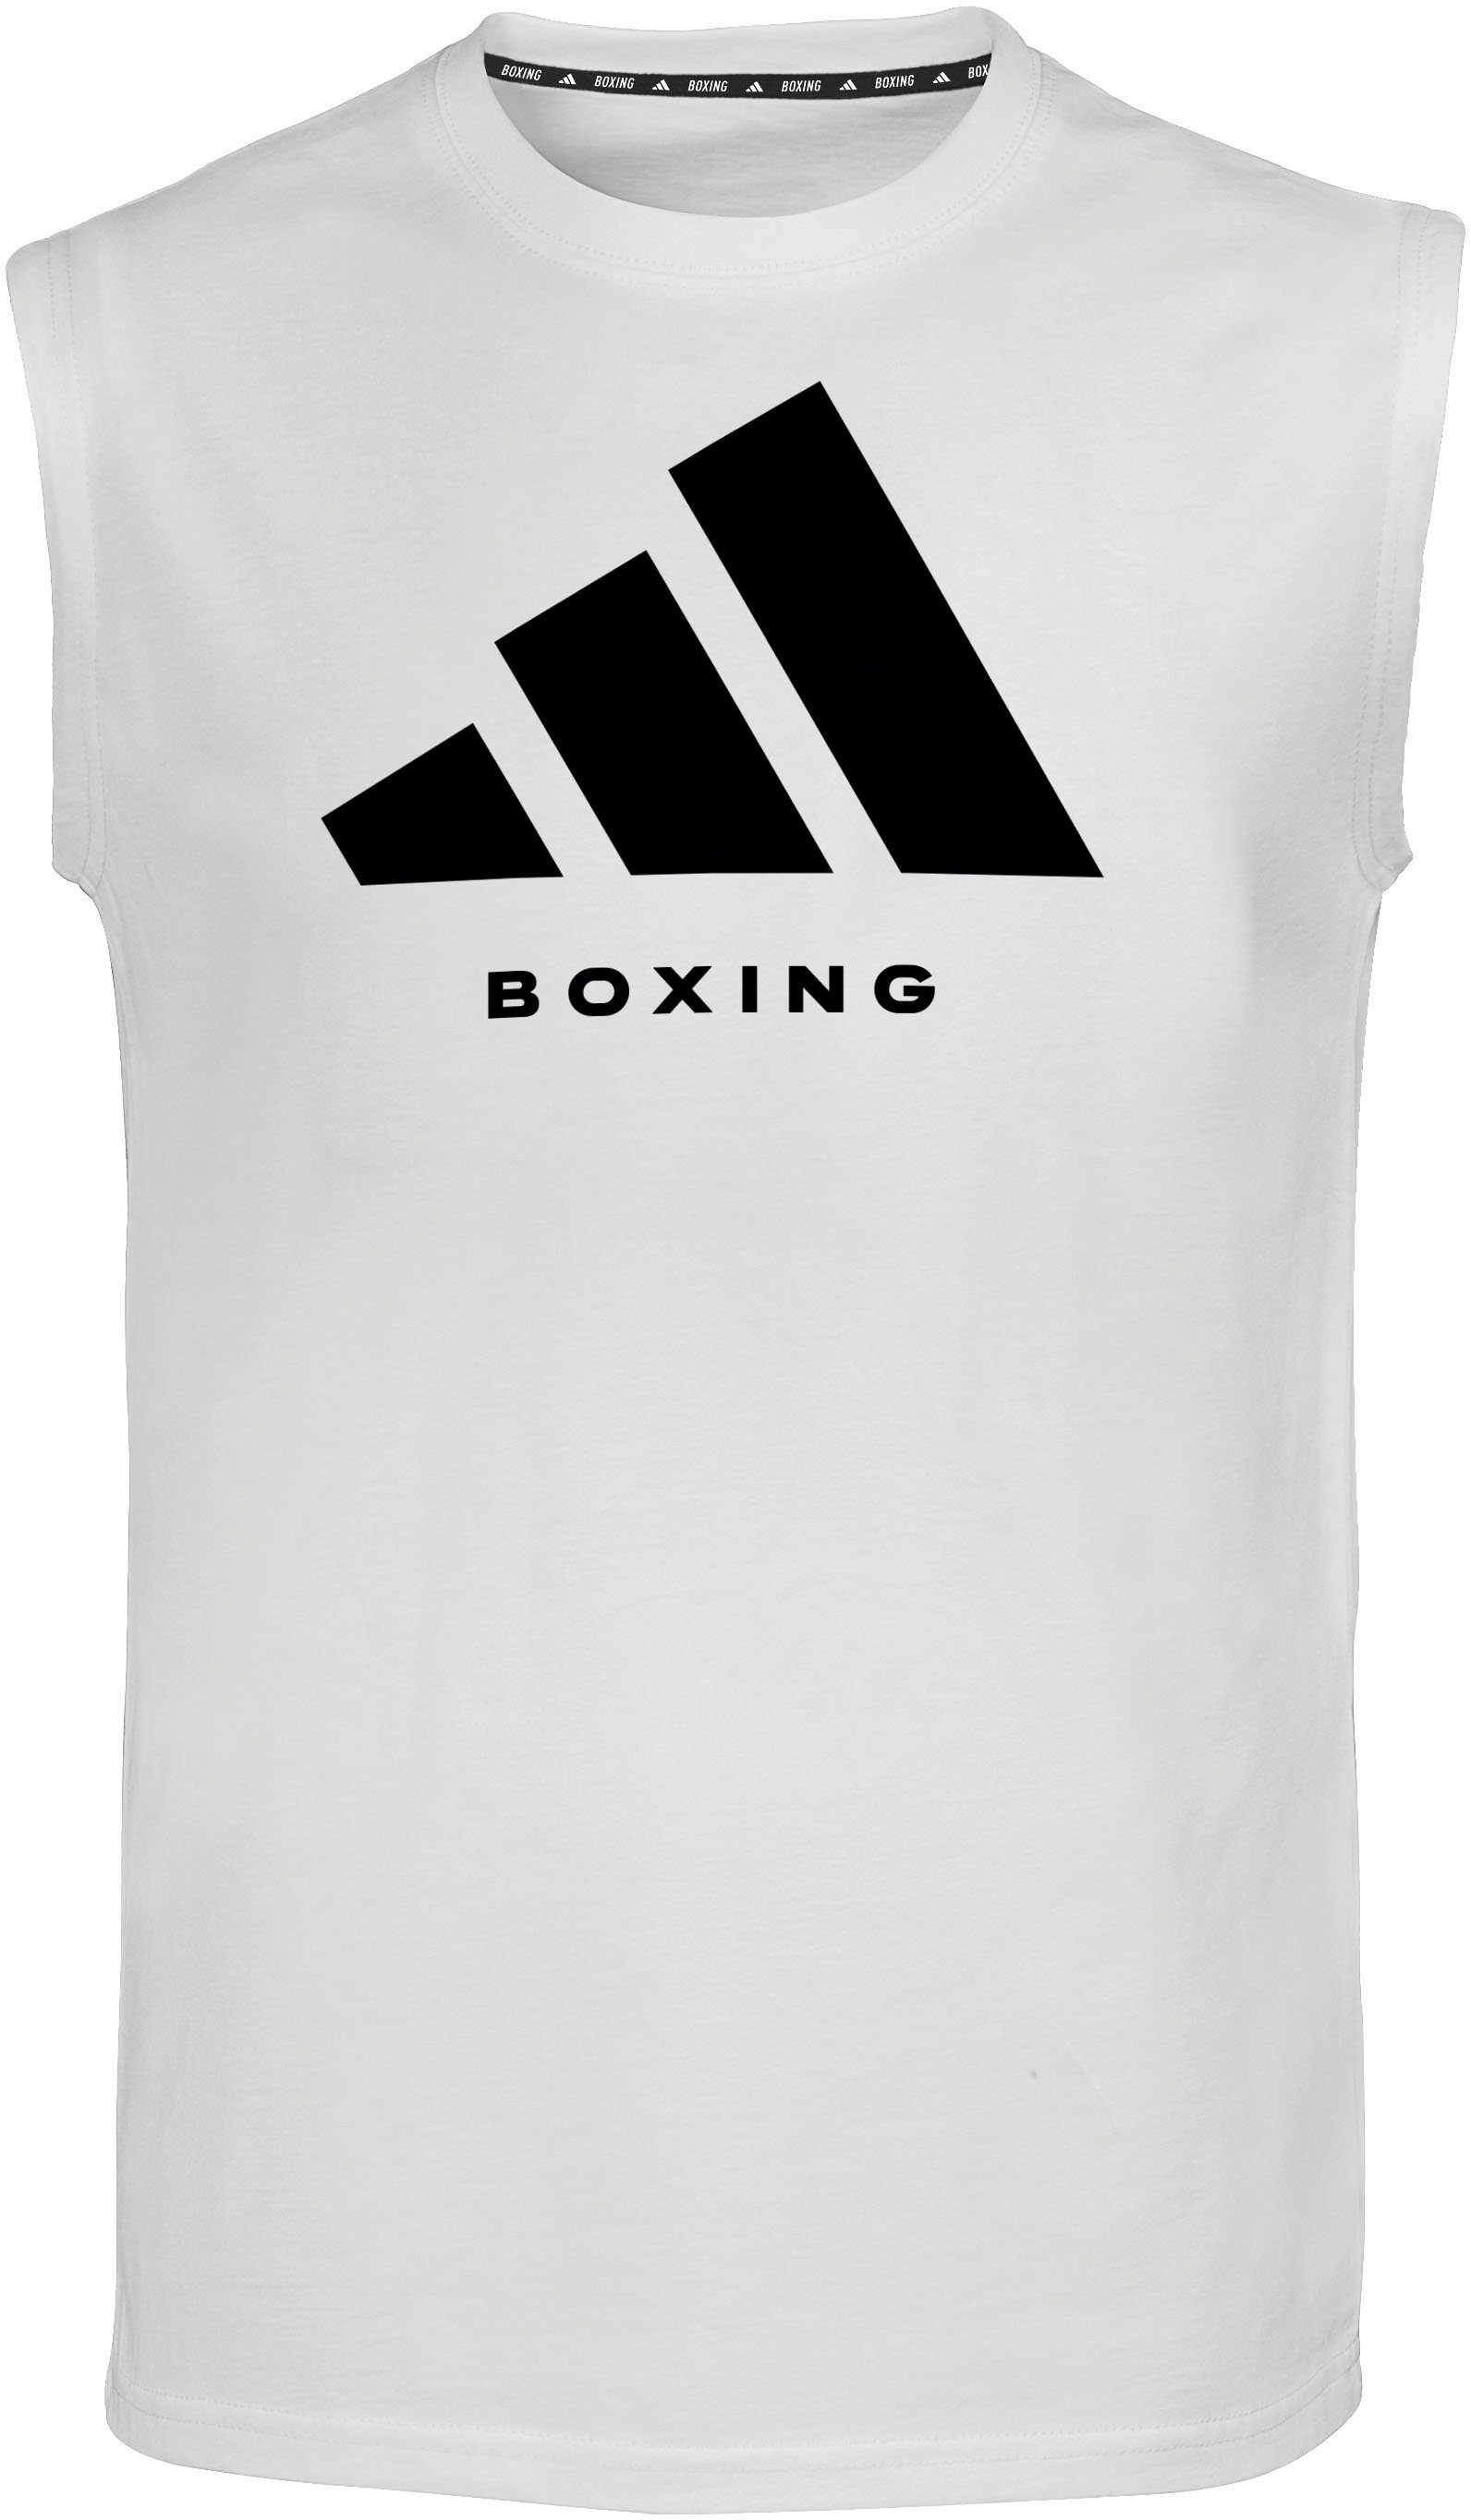 Boxing weiß Top Muskelshirt adidas Performance Community Tank